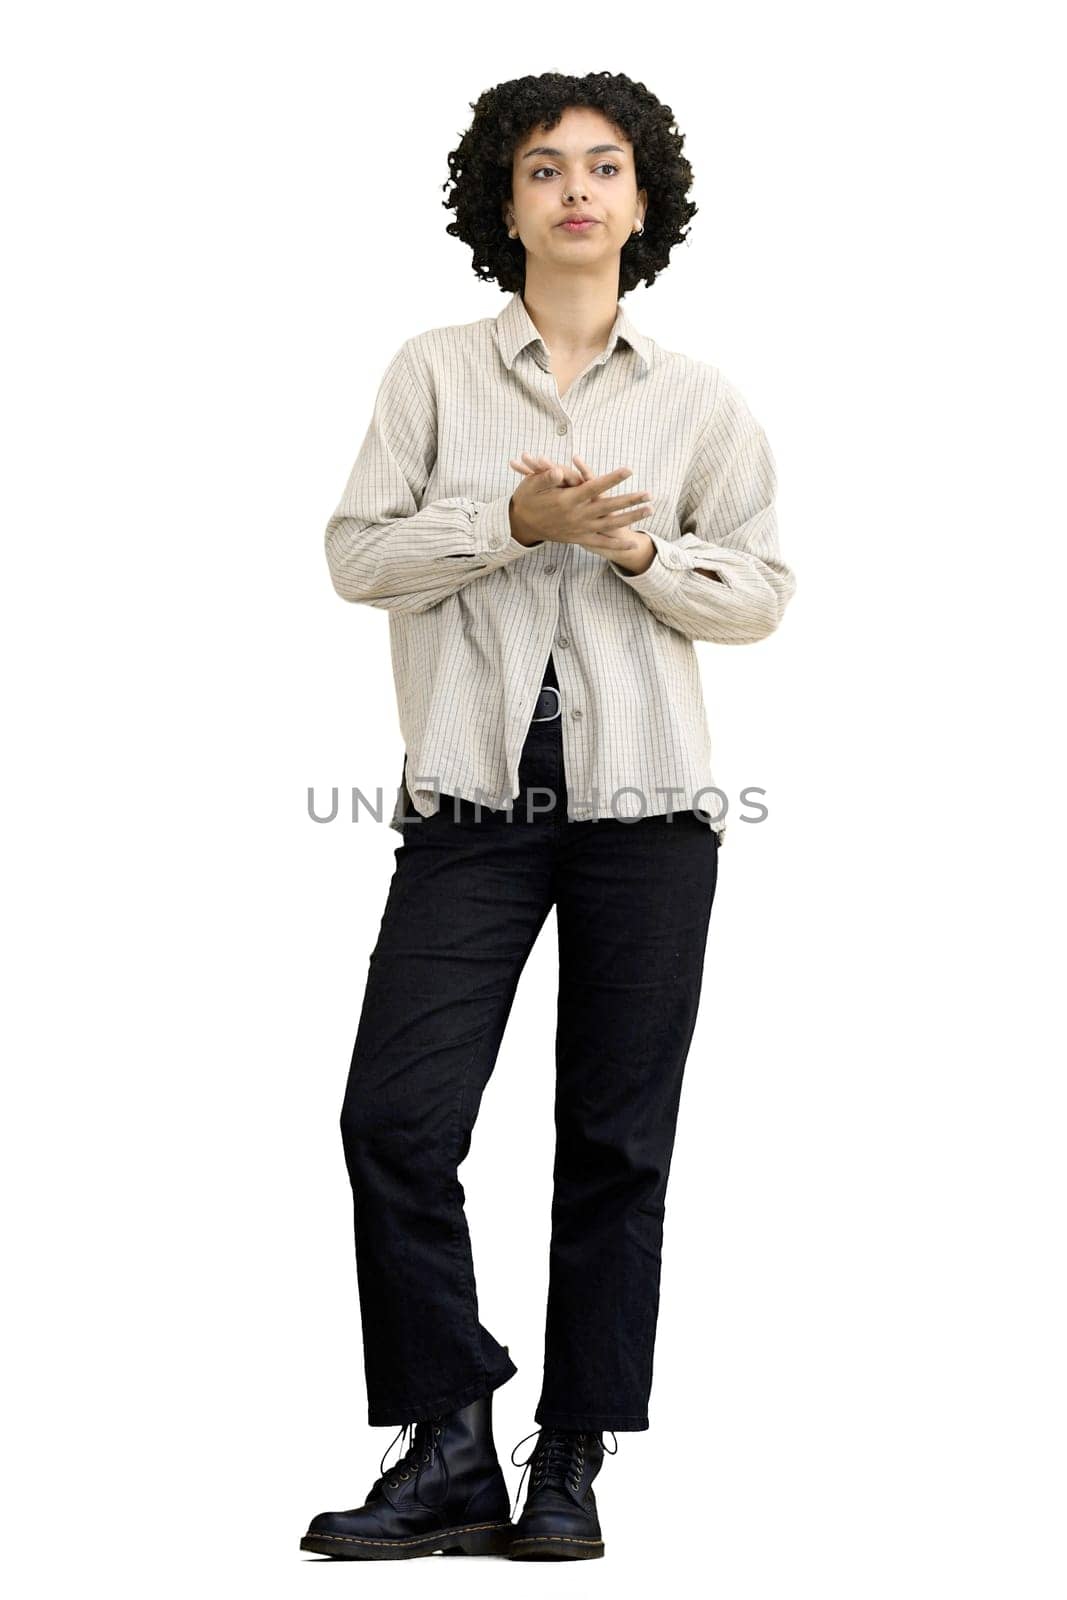 A woman, full-length, on a white background, looks at her watch.